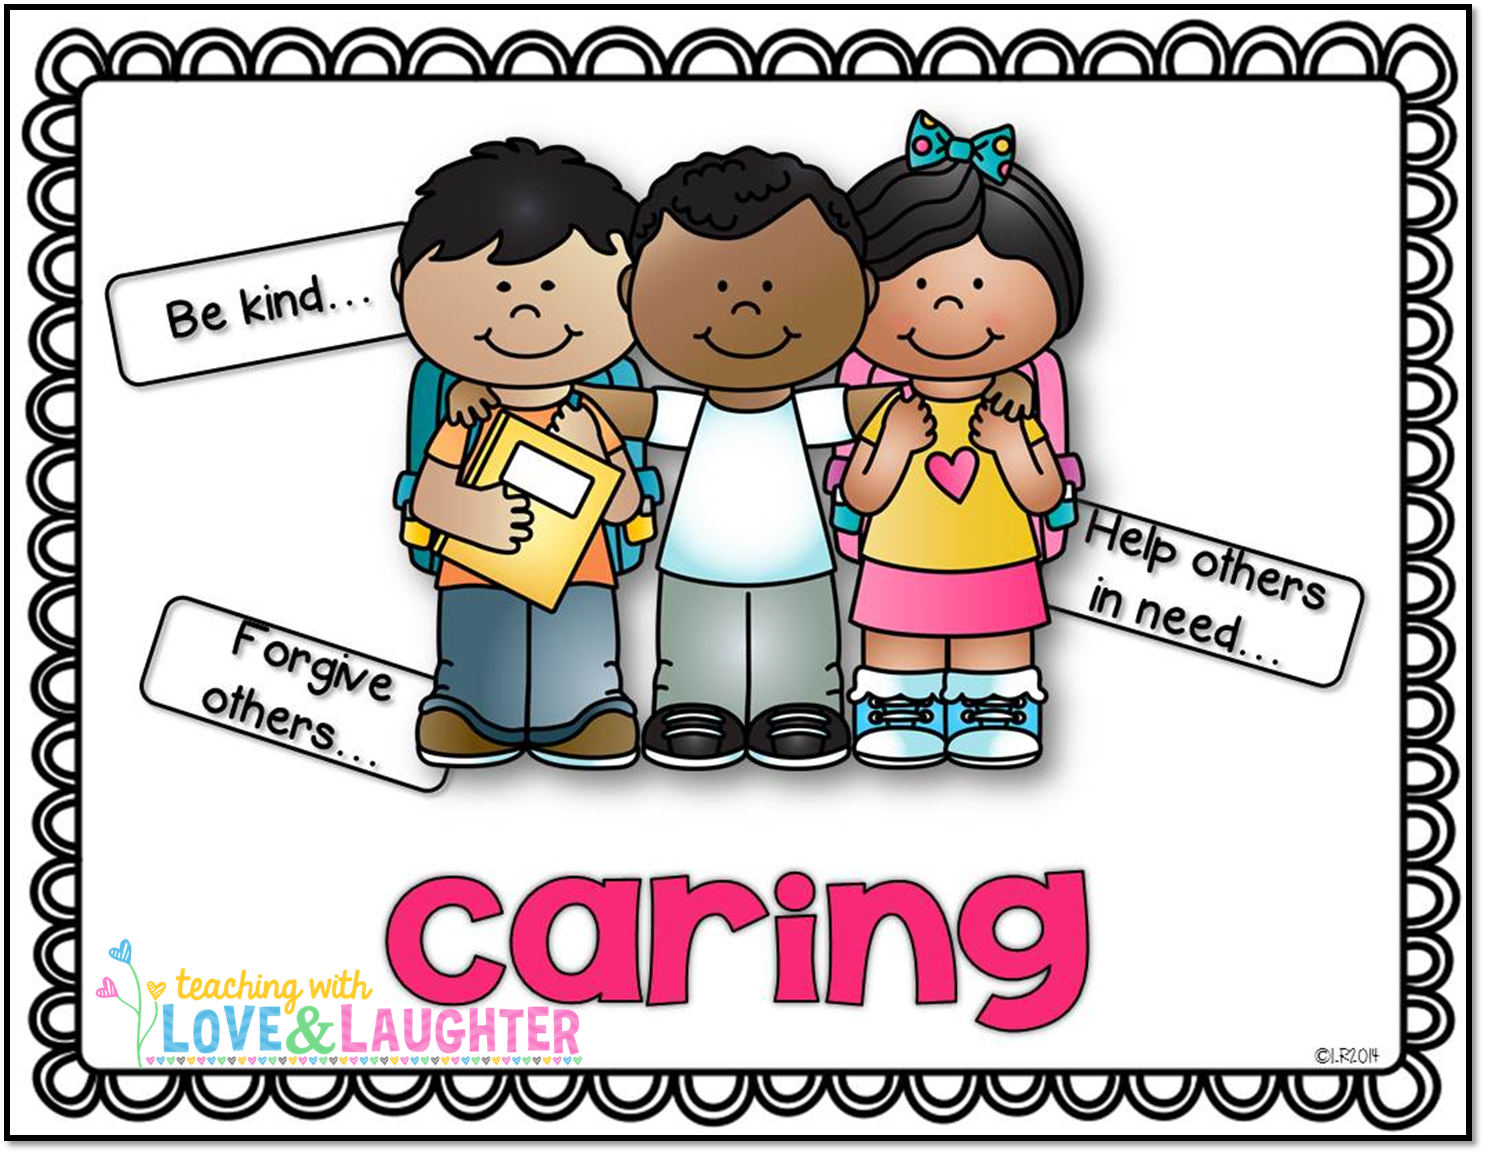 Free Caring Cliparts, Download Free Clip Art, Free Clip Art